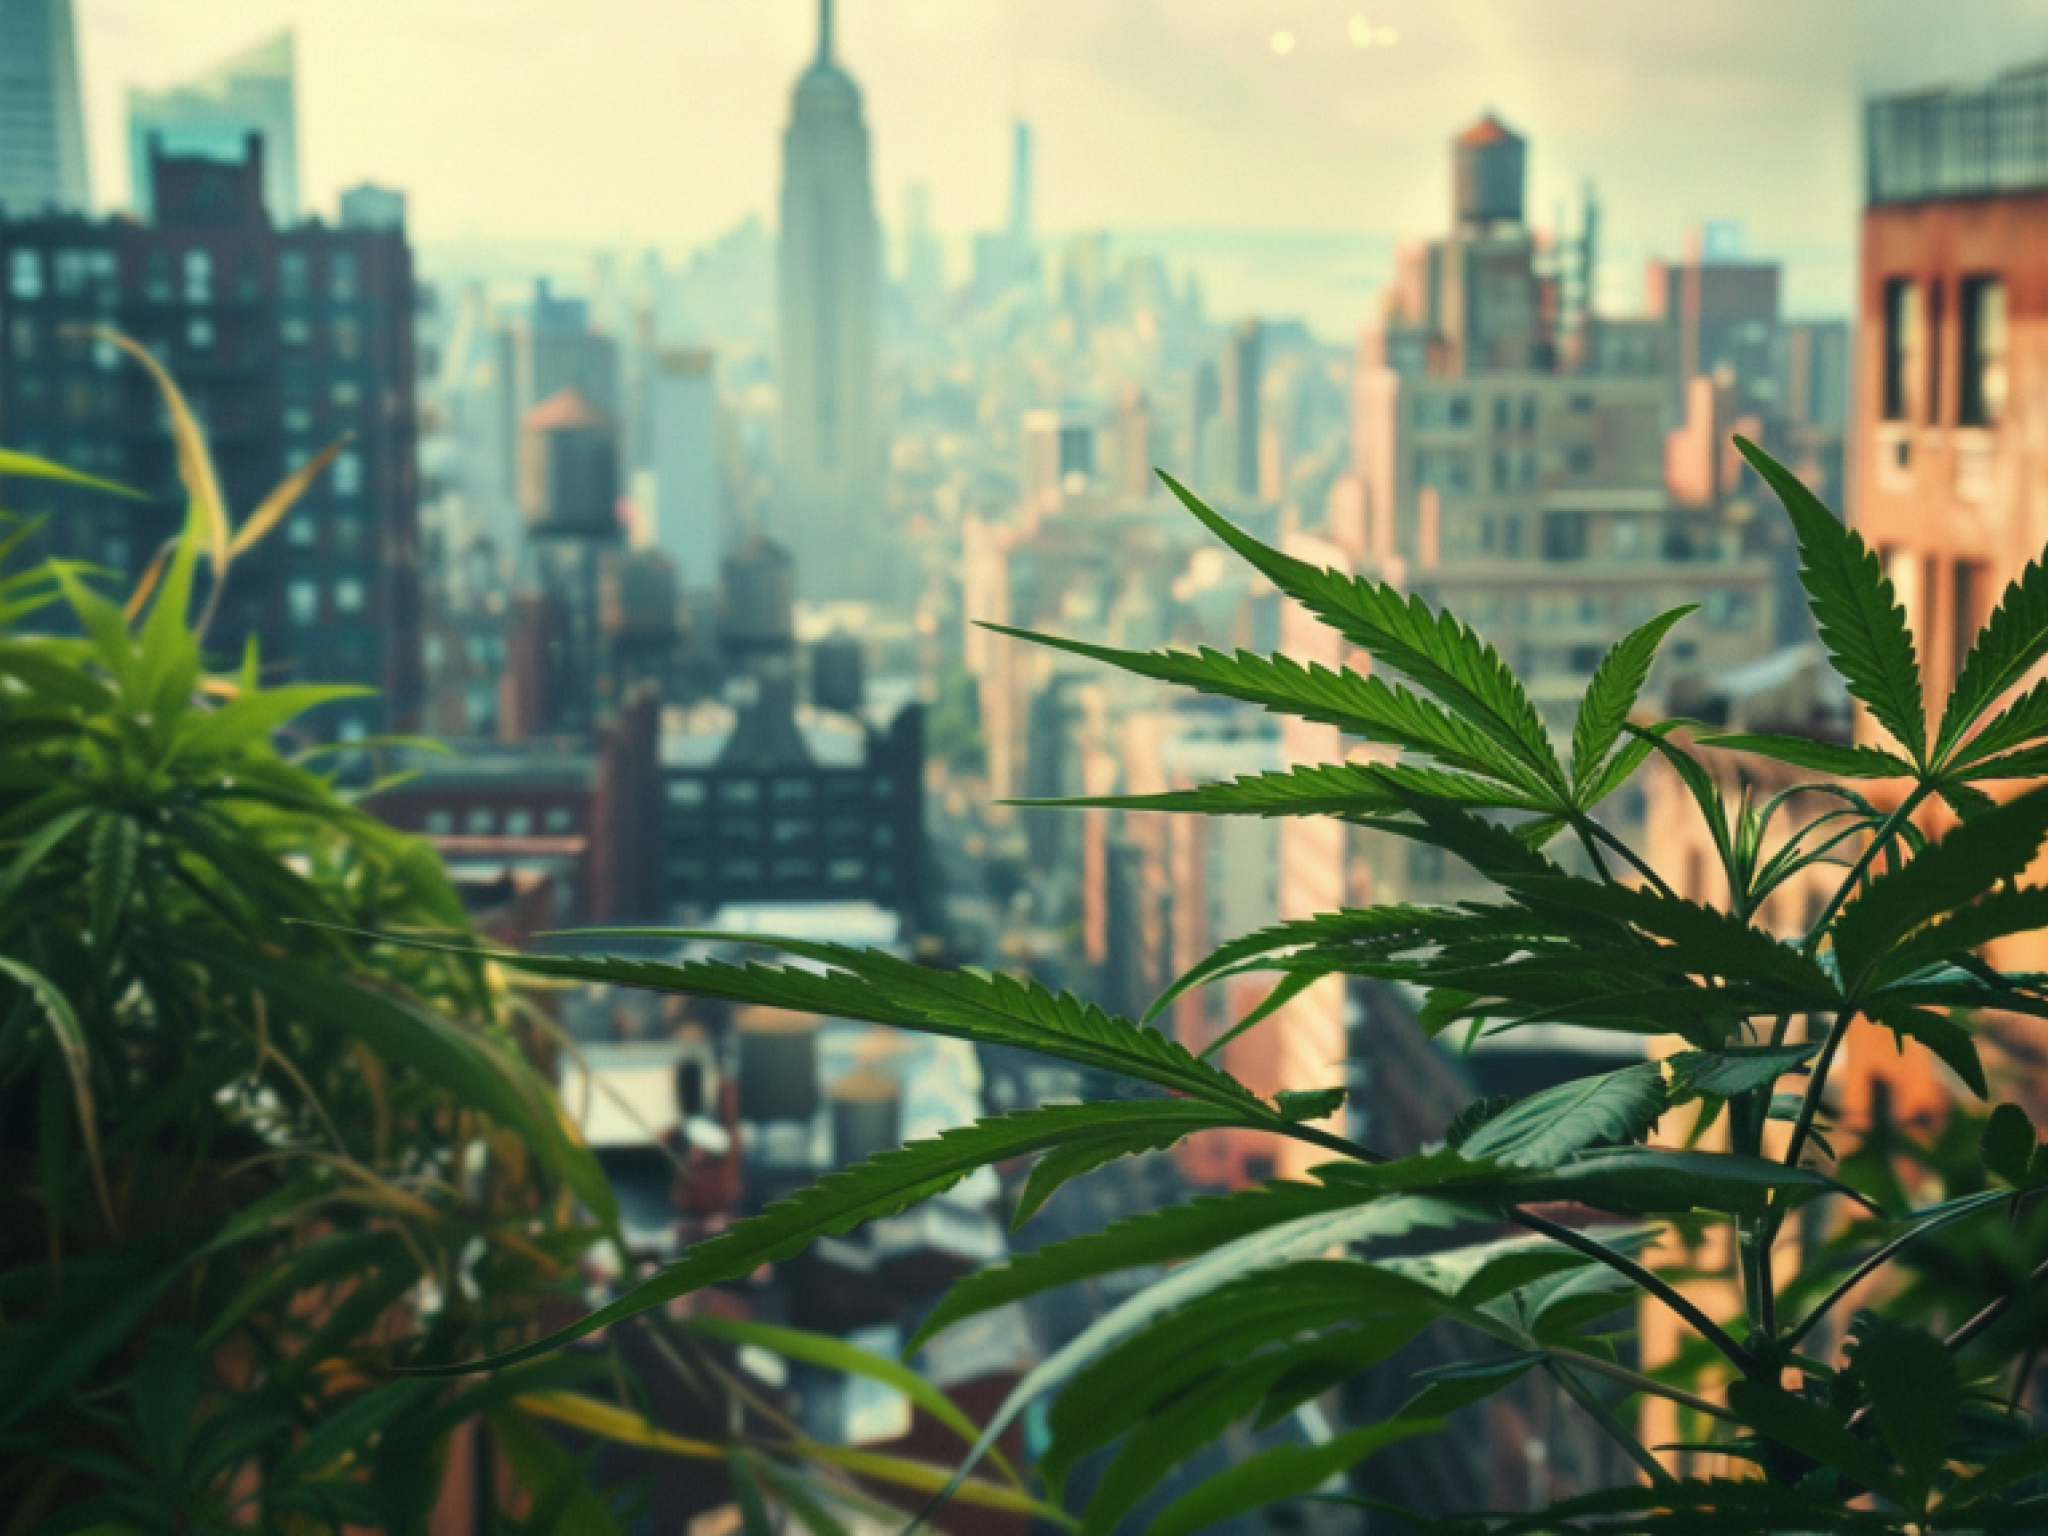  who-are-new-yorks-cannabis-shoppers-weedmaps-reveals-fresh-data-amid-legal-market-expansion 